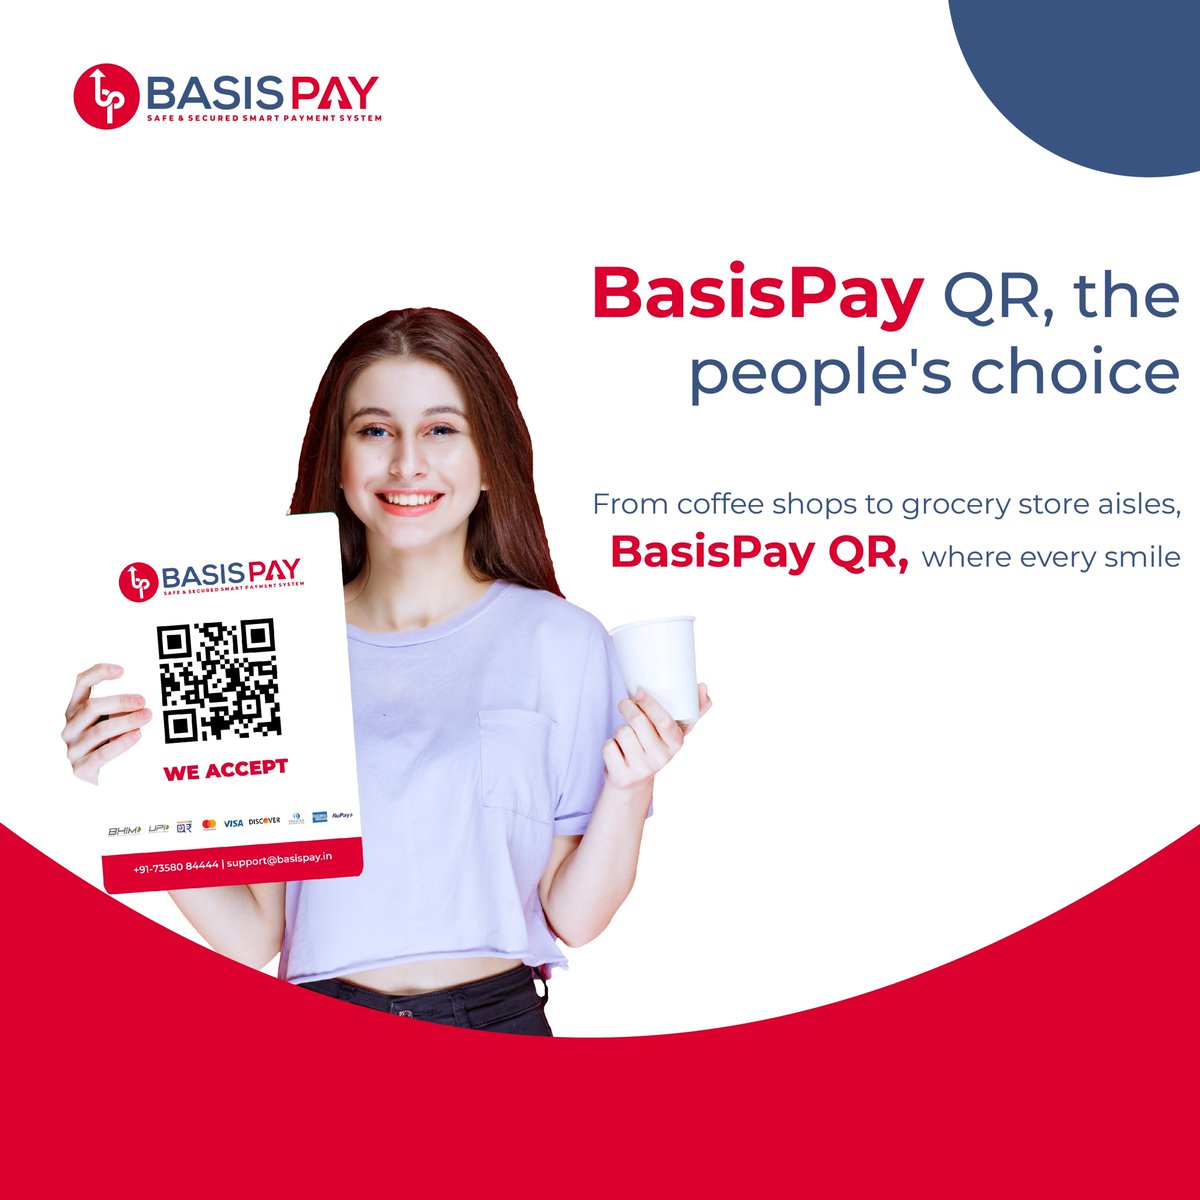 BasisPay QR, the people's choice #basispay #upi #pointofsale #contactlesspayments #buy #bank #finance #news #online #mobile #shopping #pos #qrpay #qr #digitalpayment #payments #paymentgateway #india #digitalmoney #debitcard #creditcard #buy #digital #mobilepayment #ai